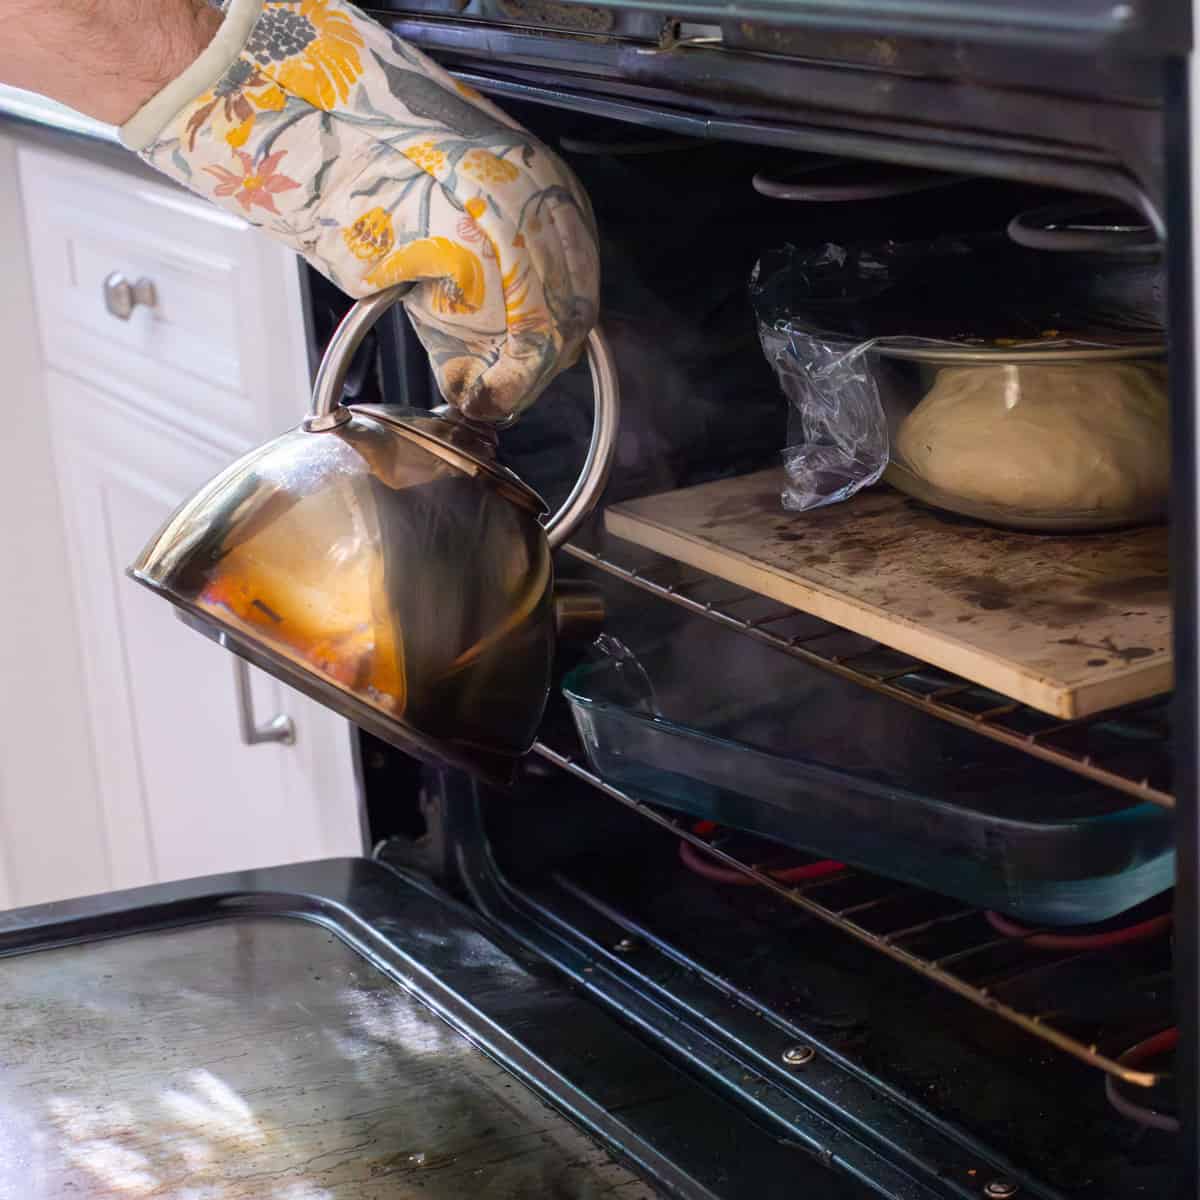 pouring hot water from a kettle into a pyrex dish under bowl of donut dough in oven.